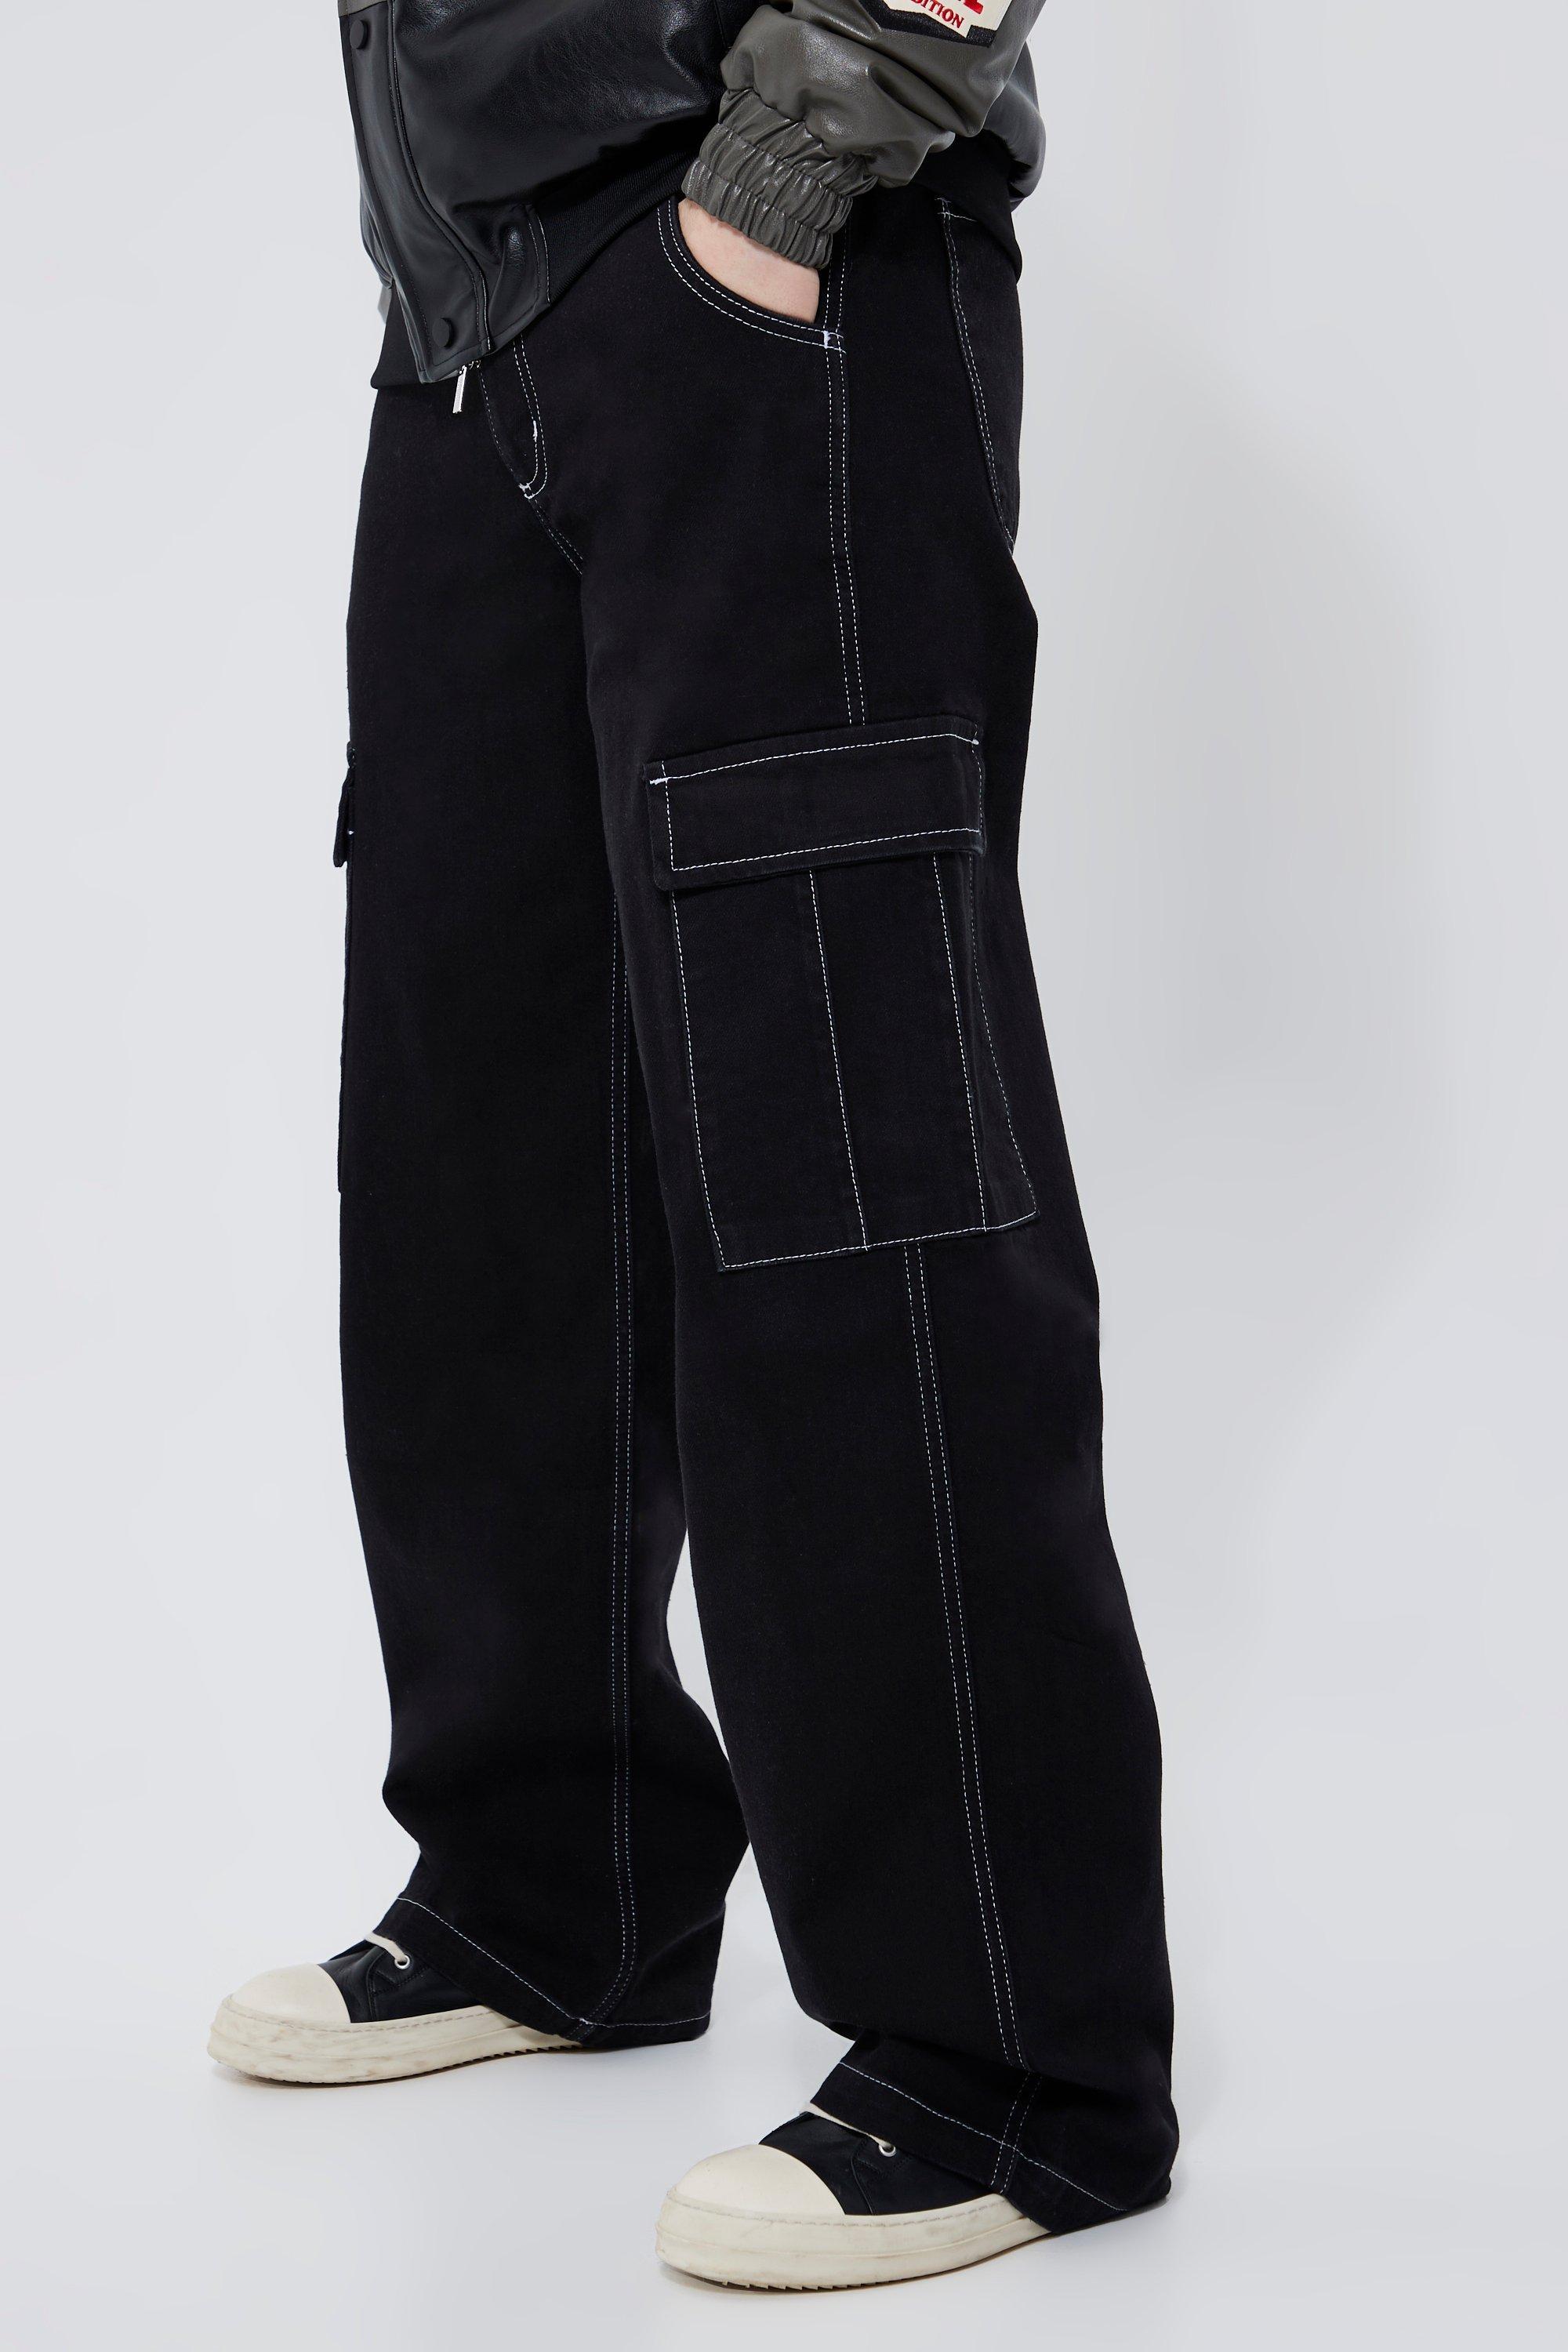 BoohooMAN Tall Baggy Contrast Stitch Cargo Pocket Jeans in Black for Men |  Lyst